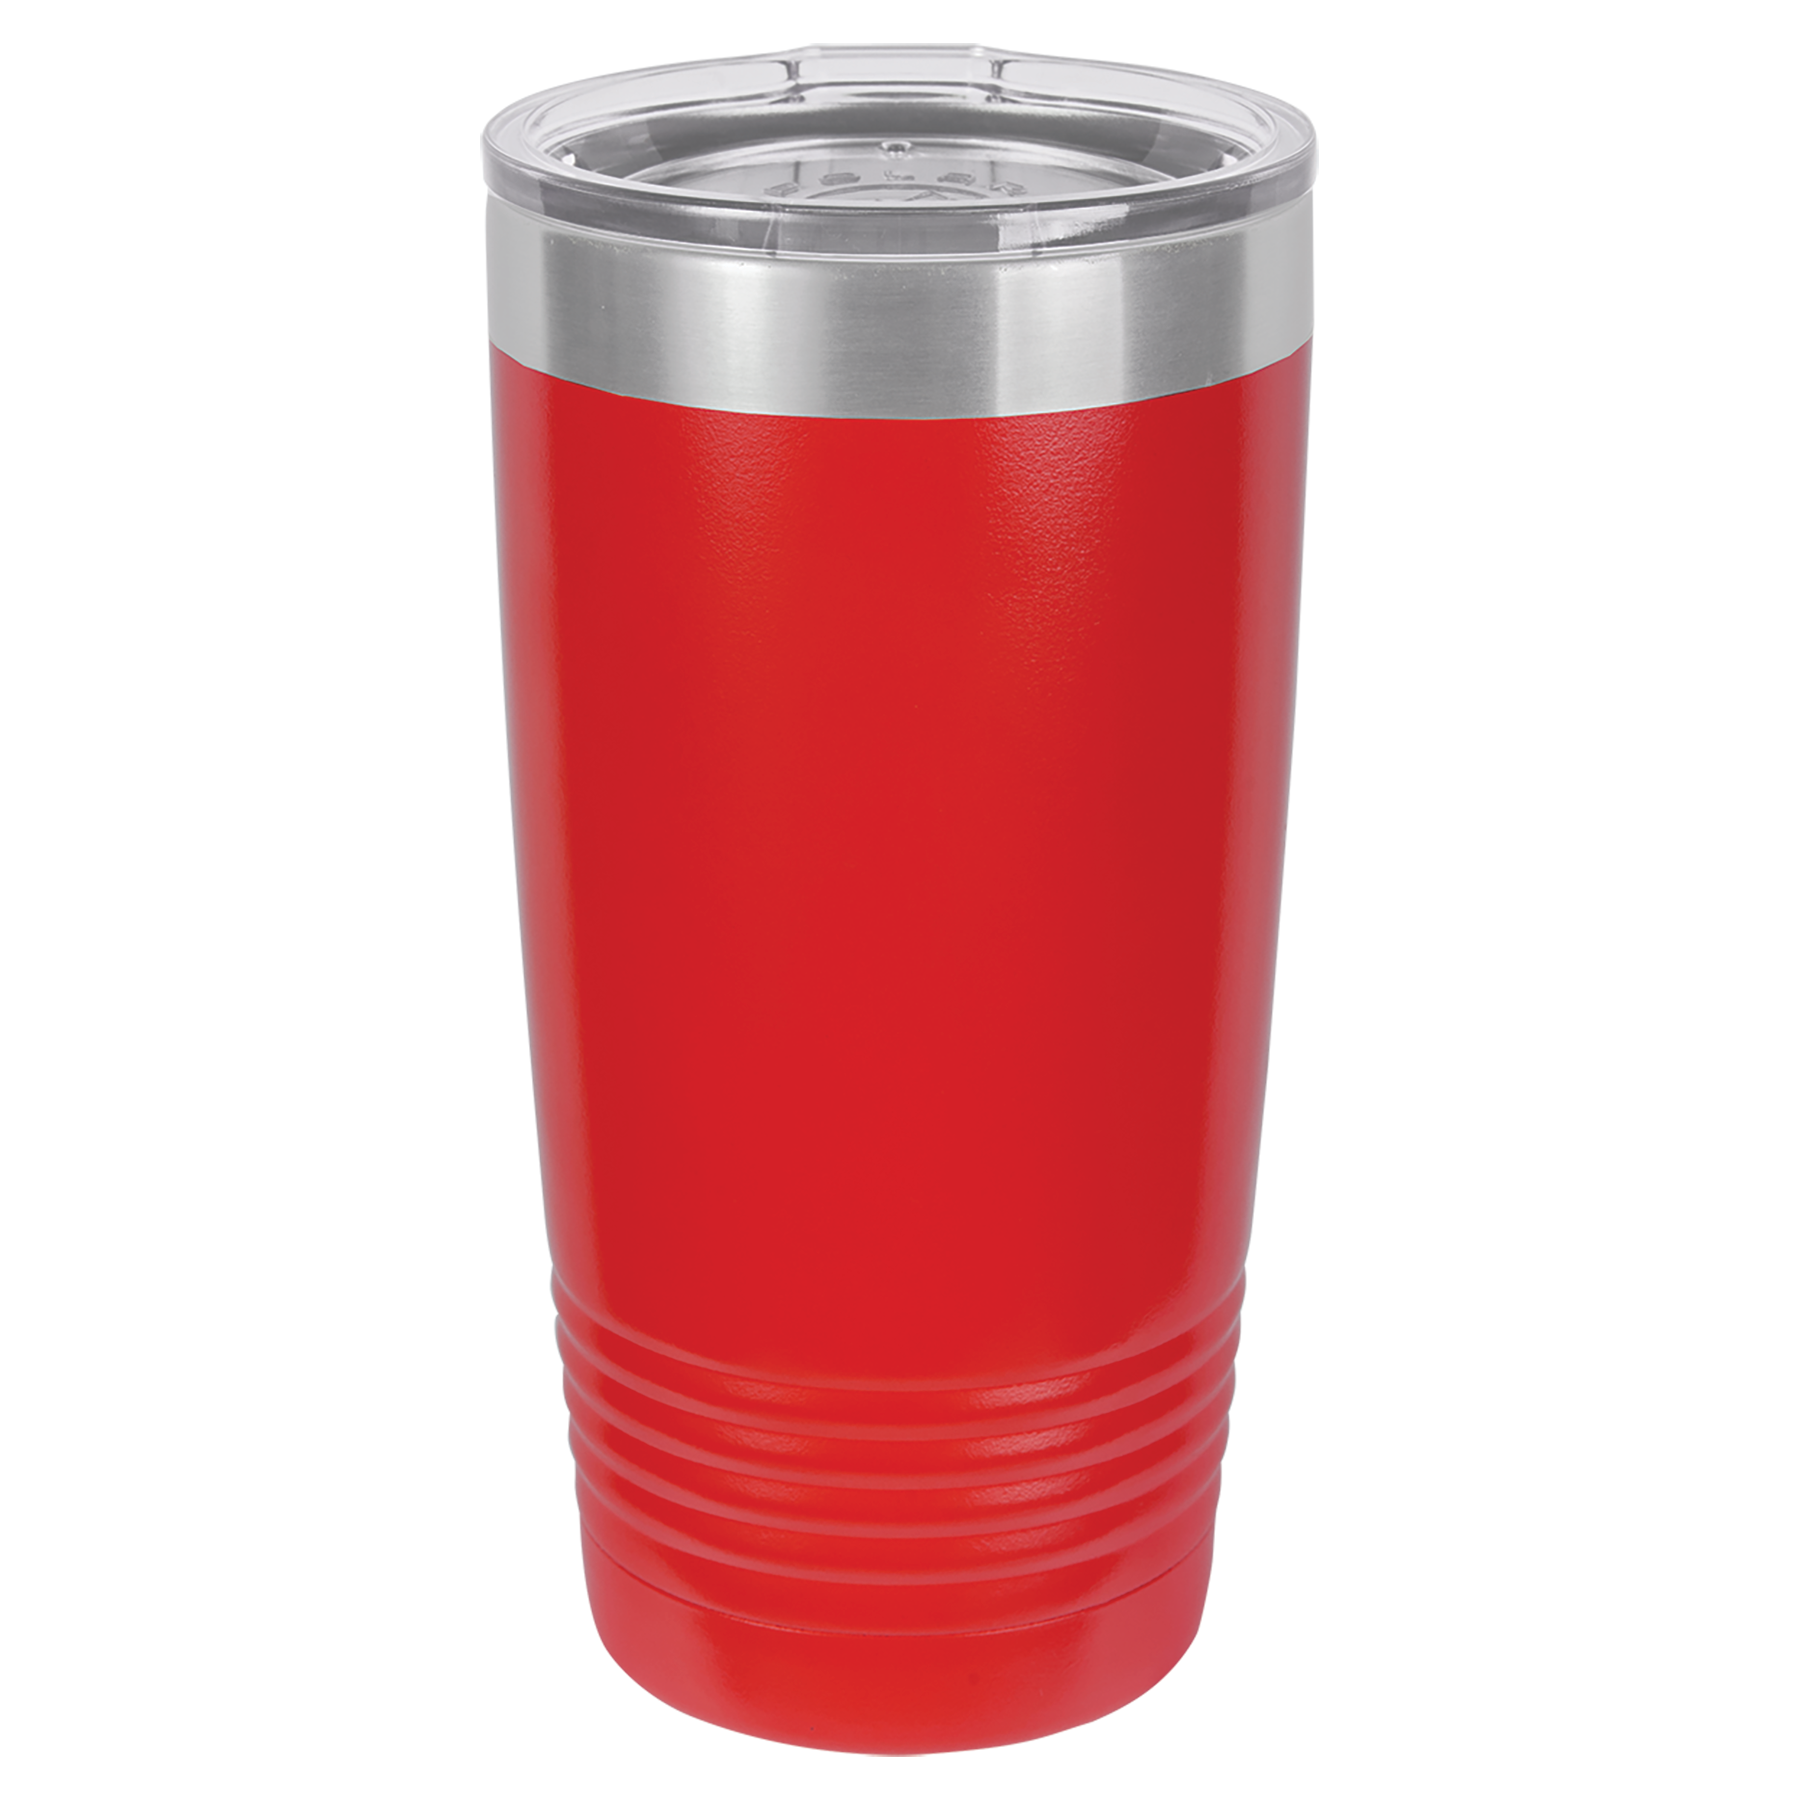 Engraved Red 20oz Tumbler. double-wall vacuum insulation with slider lid 18/8 gauge stainless steel (18% chromium/8% nickel) - also known as Type 304 Food Grade. Dishwasher Safe. Personalize with your name or a custom saying. Great for Company Logo and Branding. 